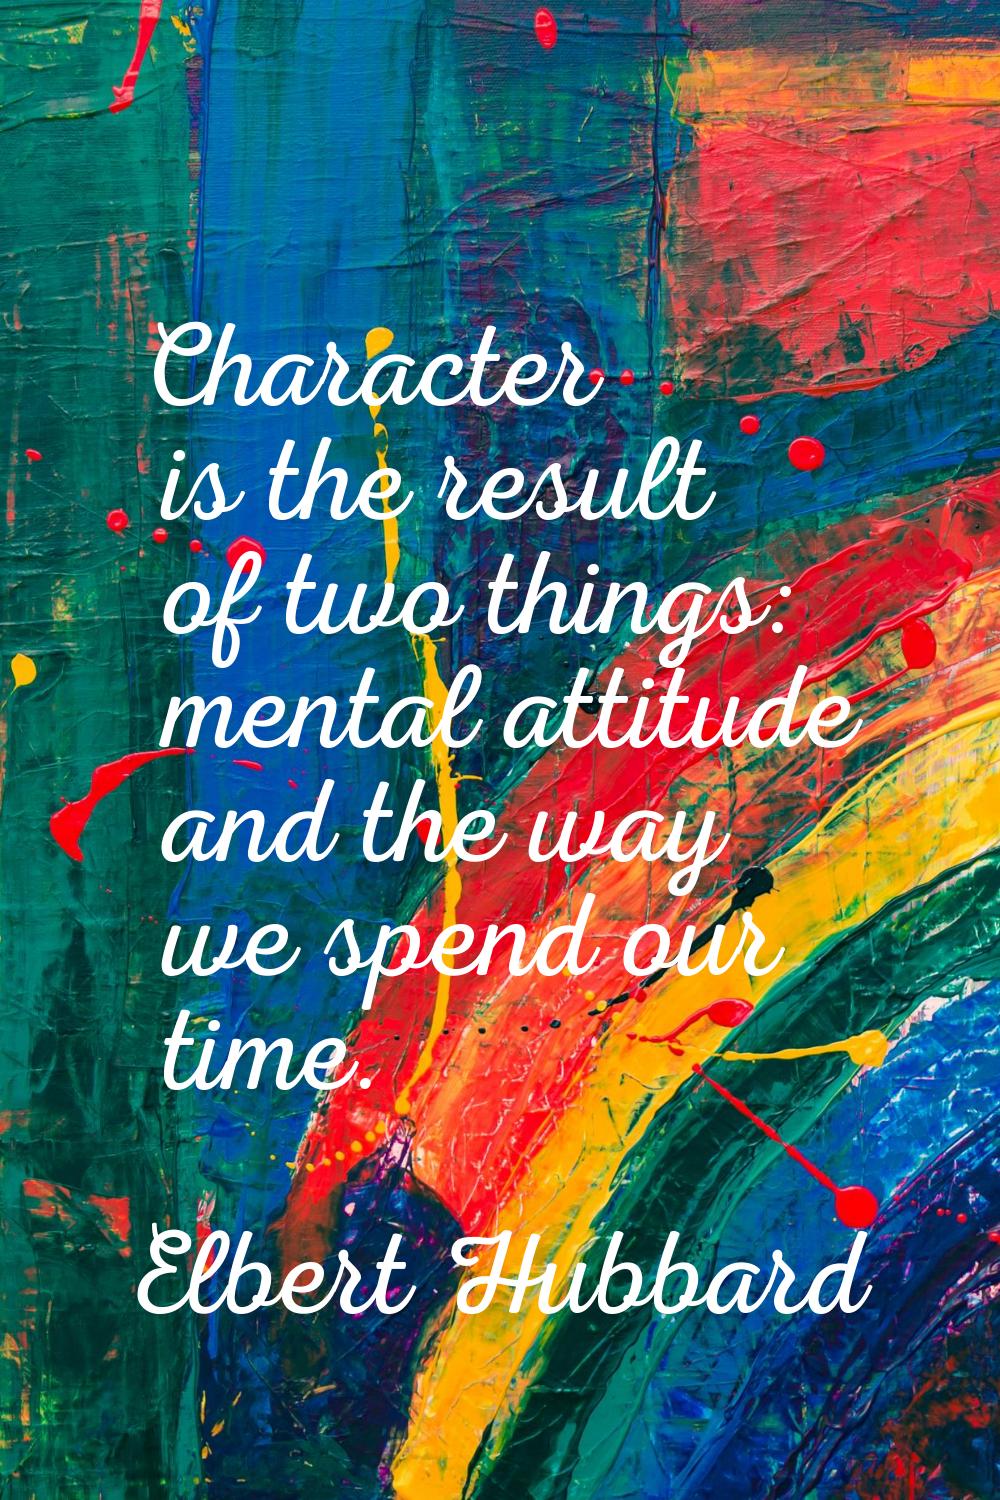 Character is the result of two things: mental attitude and the way we spend our time.